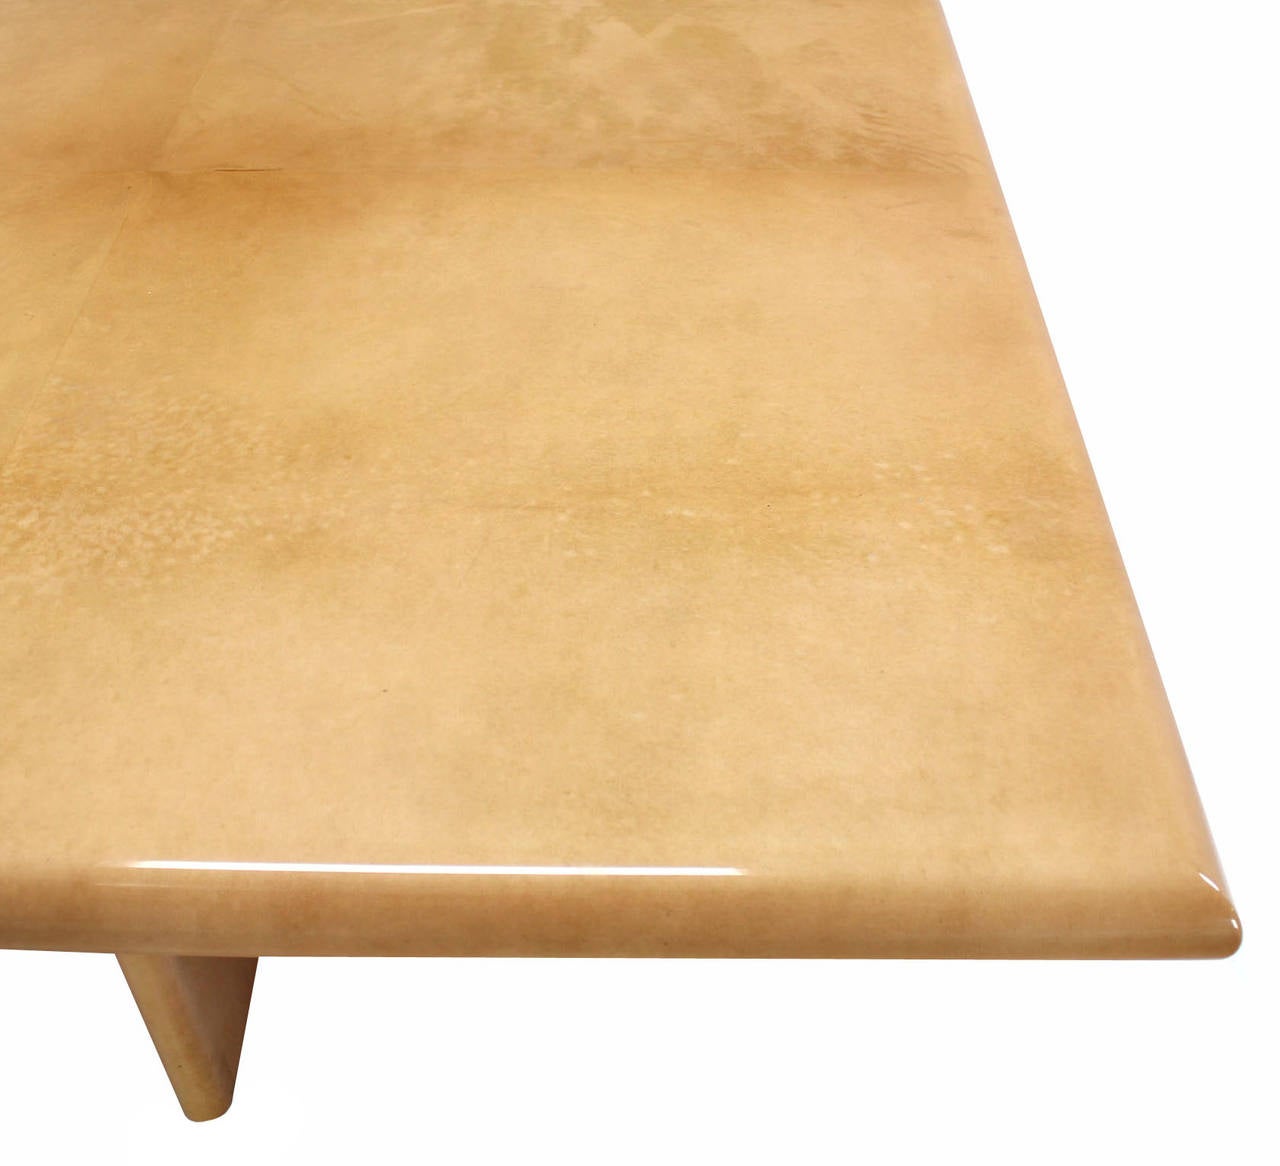 20th Century Large Square Lacquered Goat Skin Conference Dining Table